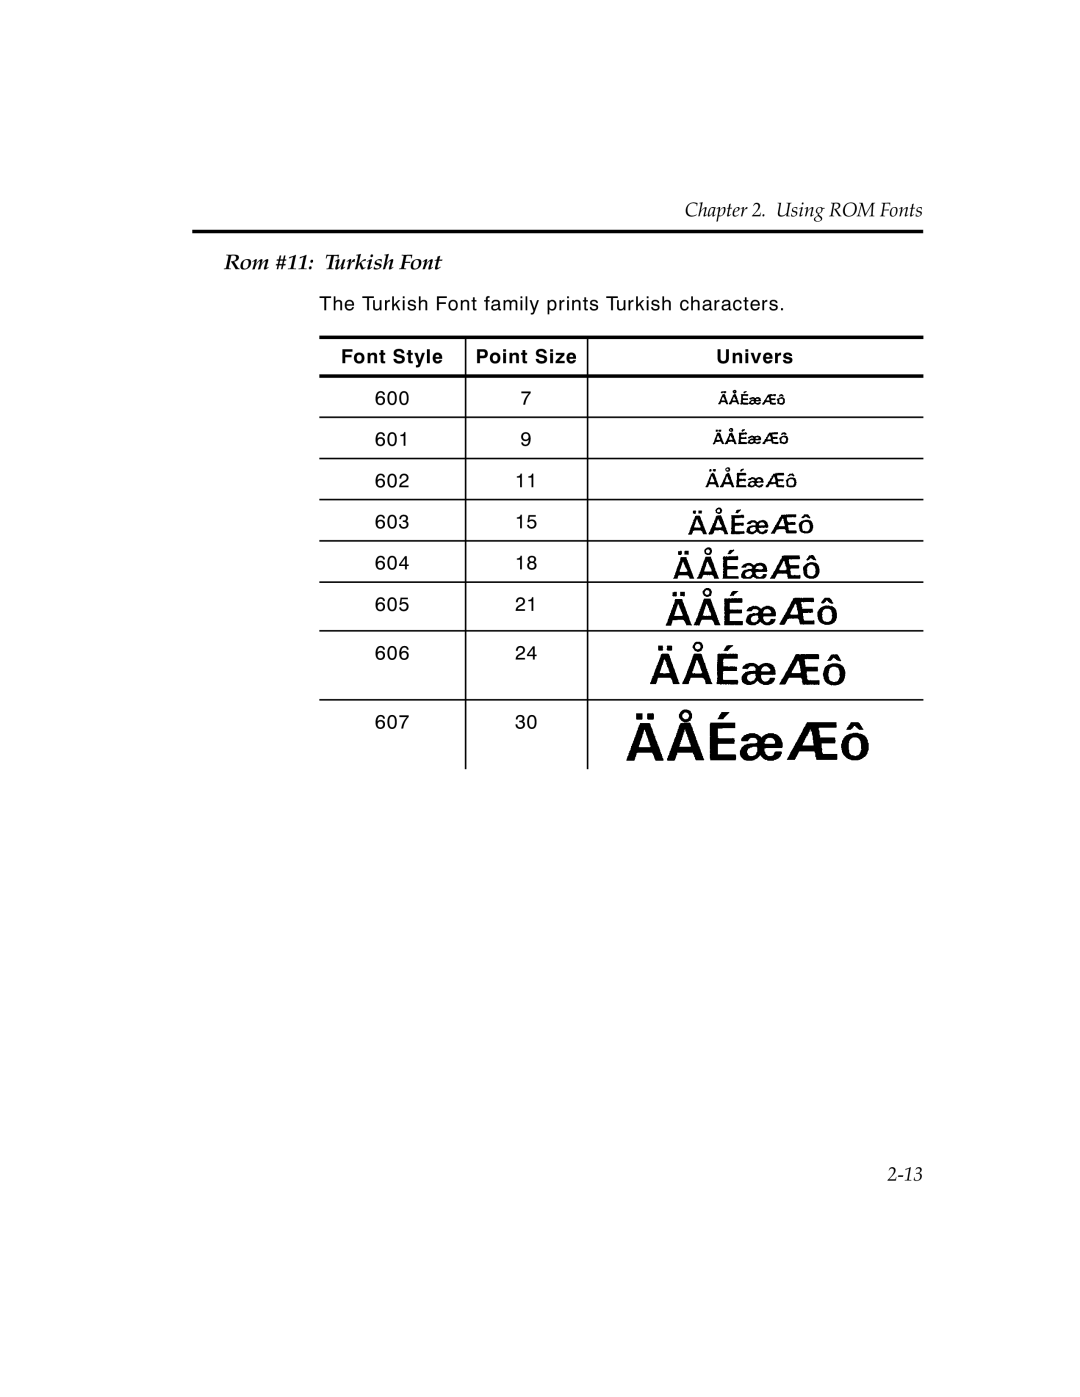 Paxar MPCL II manual Rom #11 Turkish Font, 2-13, Using ROM Fonts, Font Style, Point Size, Univers 